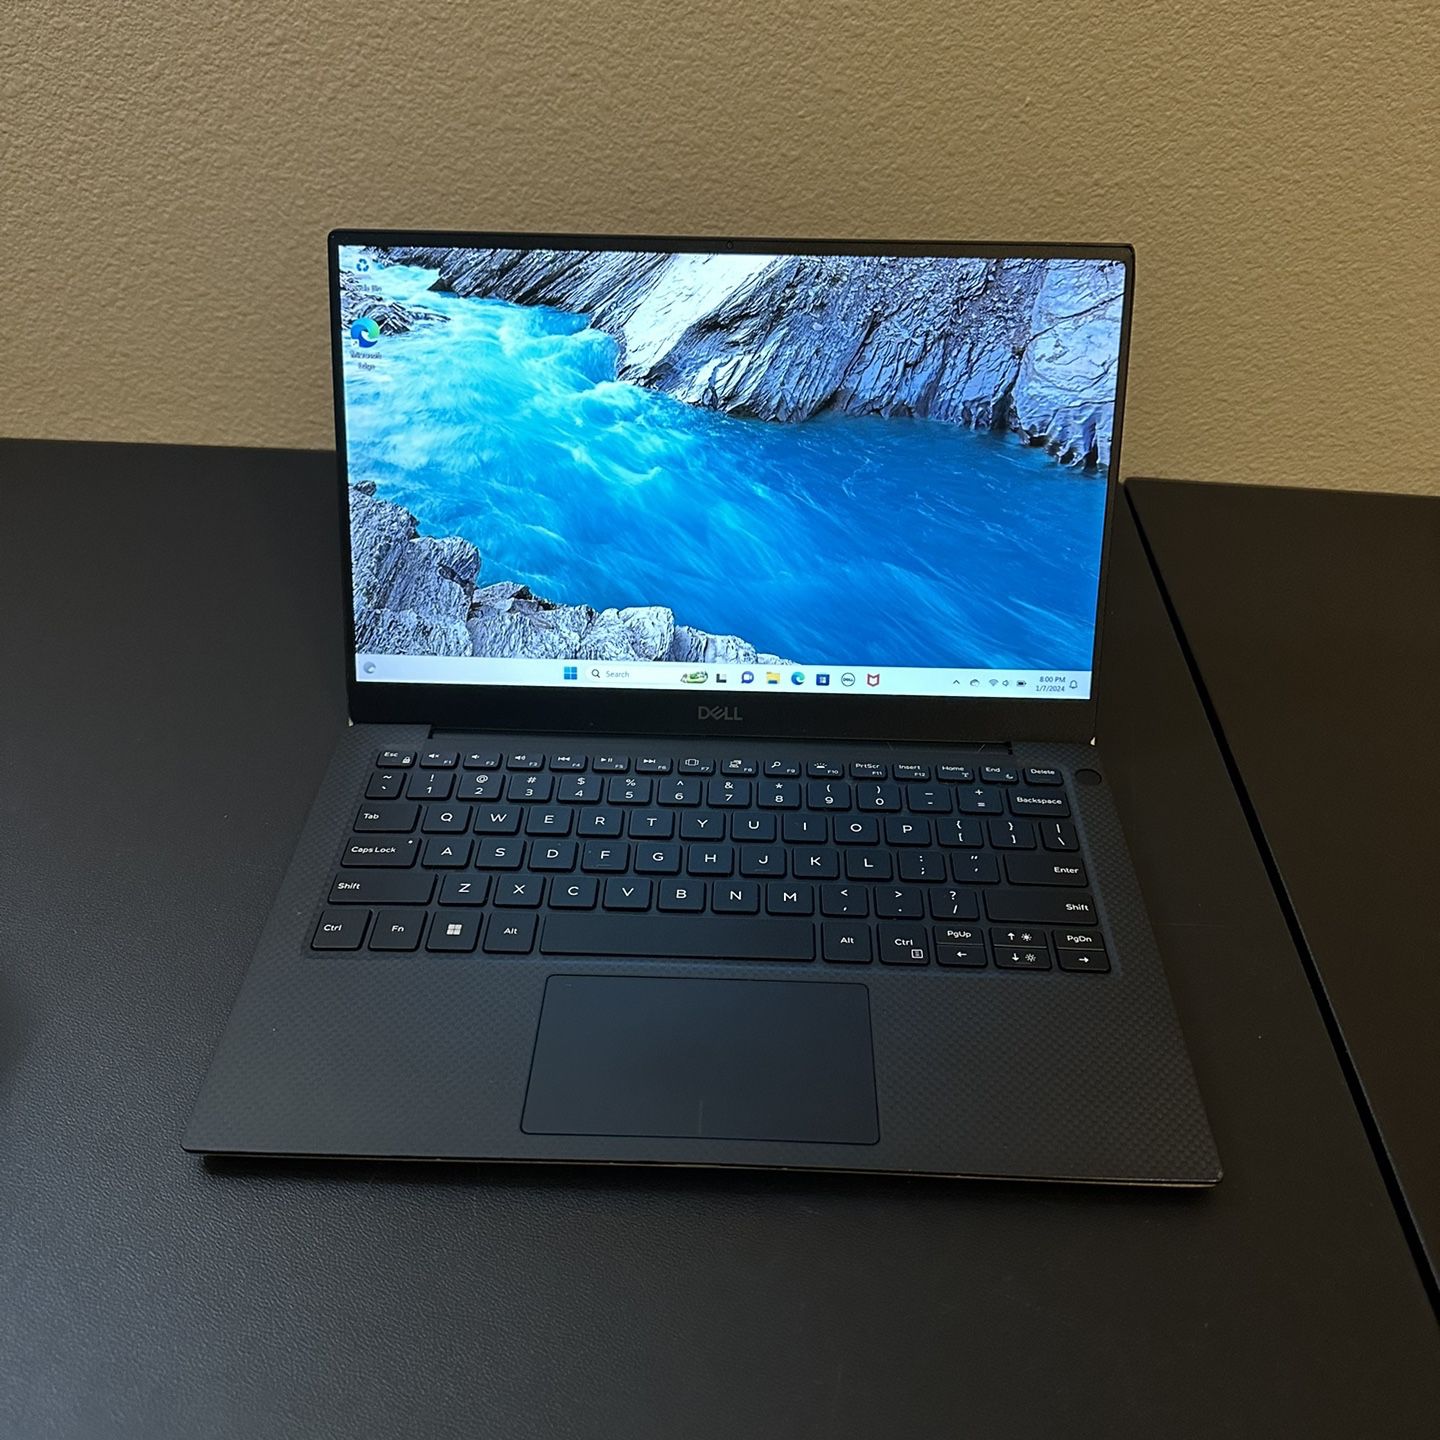 Dell XPS 13 Laptop - Excellent Working Order - Comes With Charger / Dell Warranty 